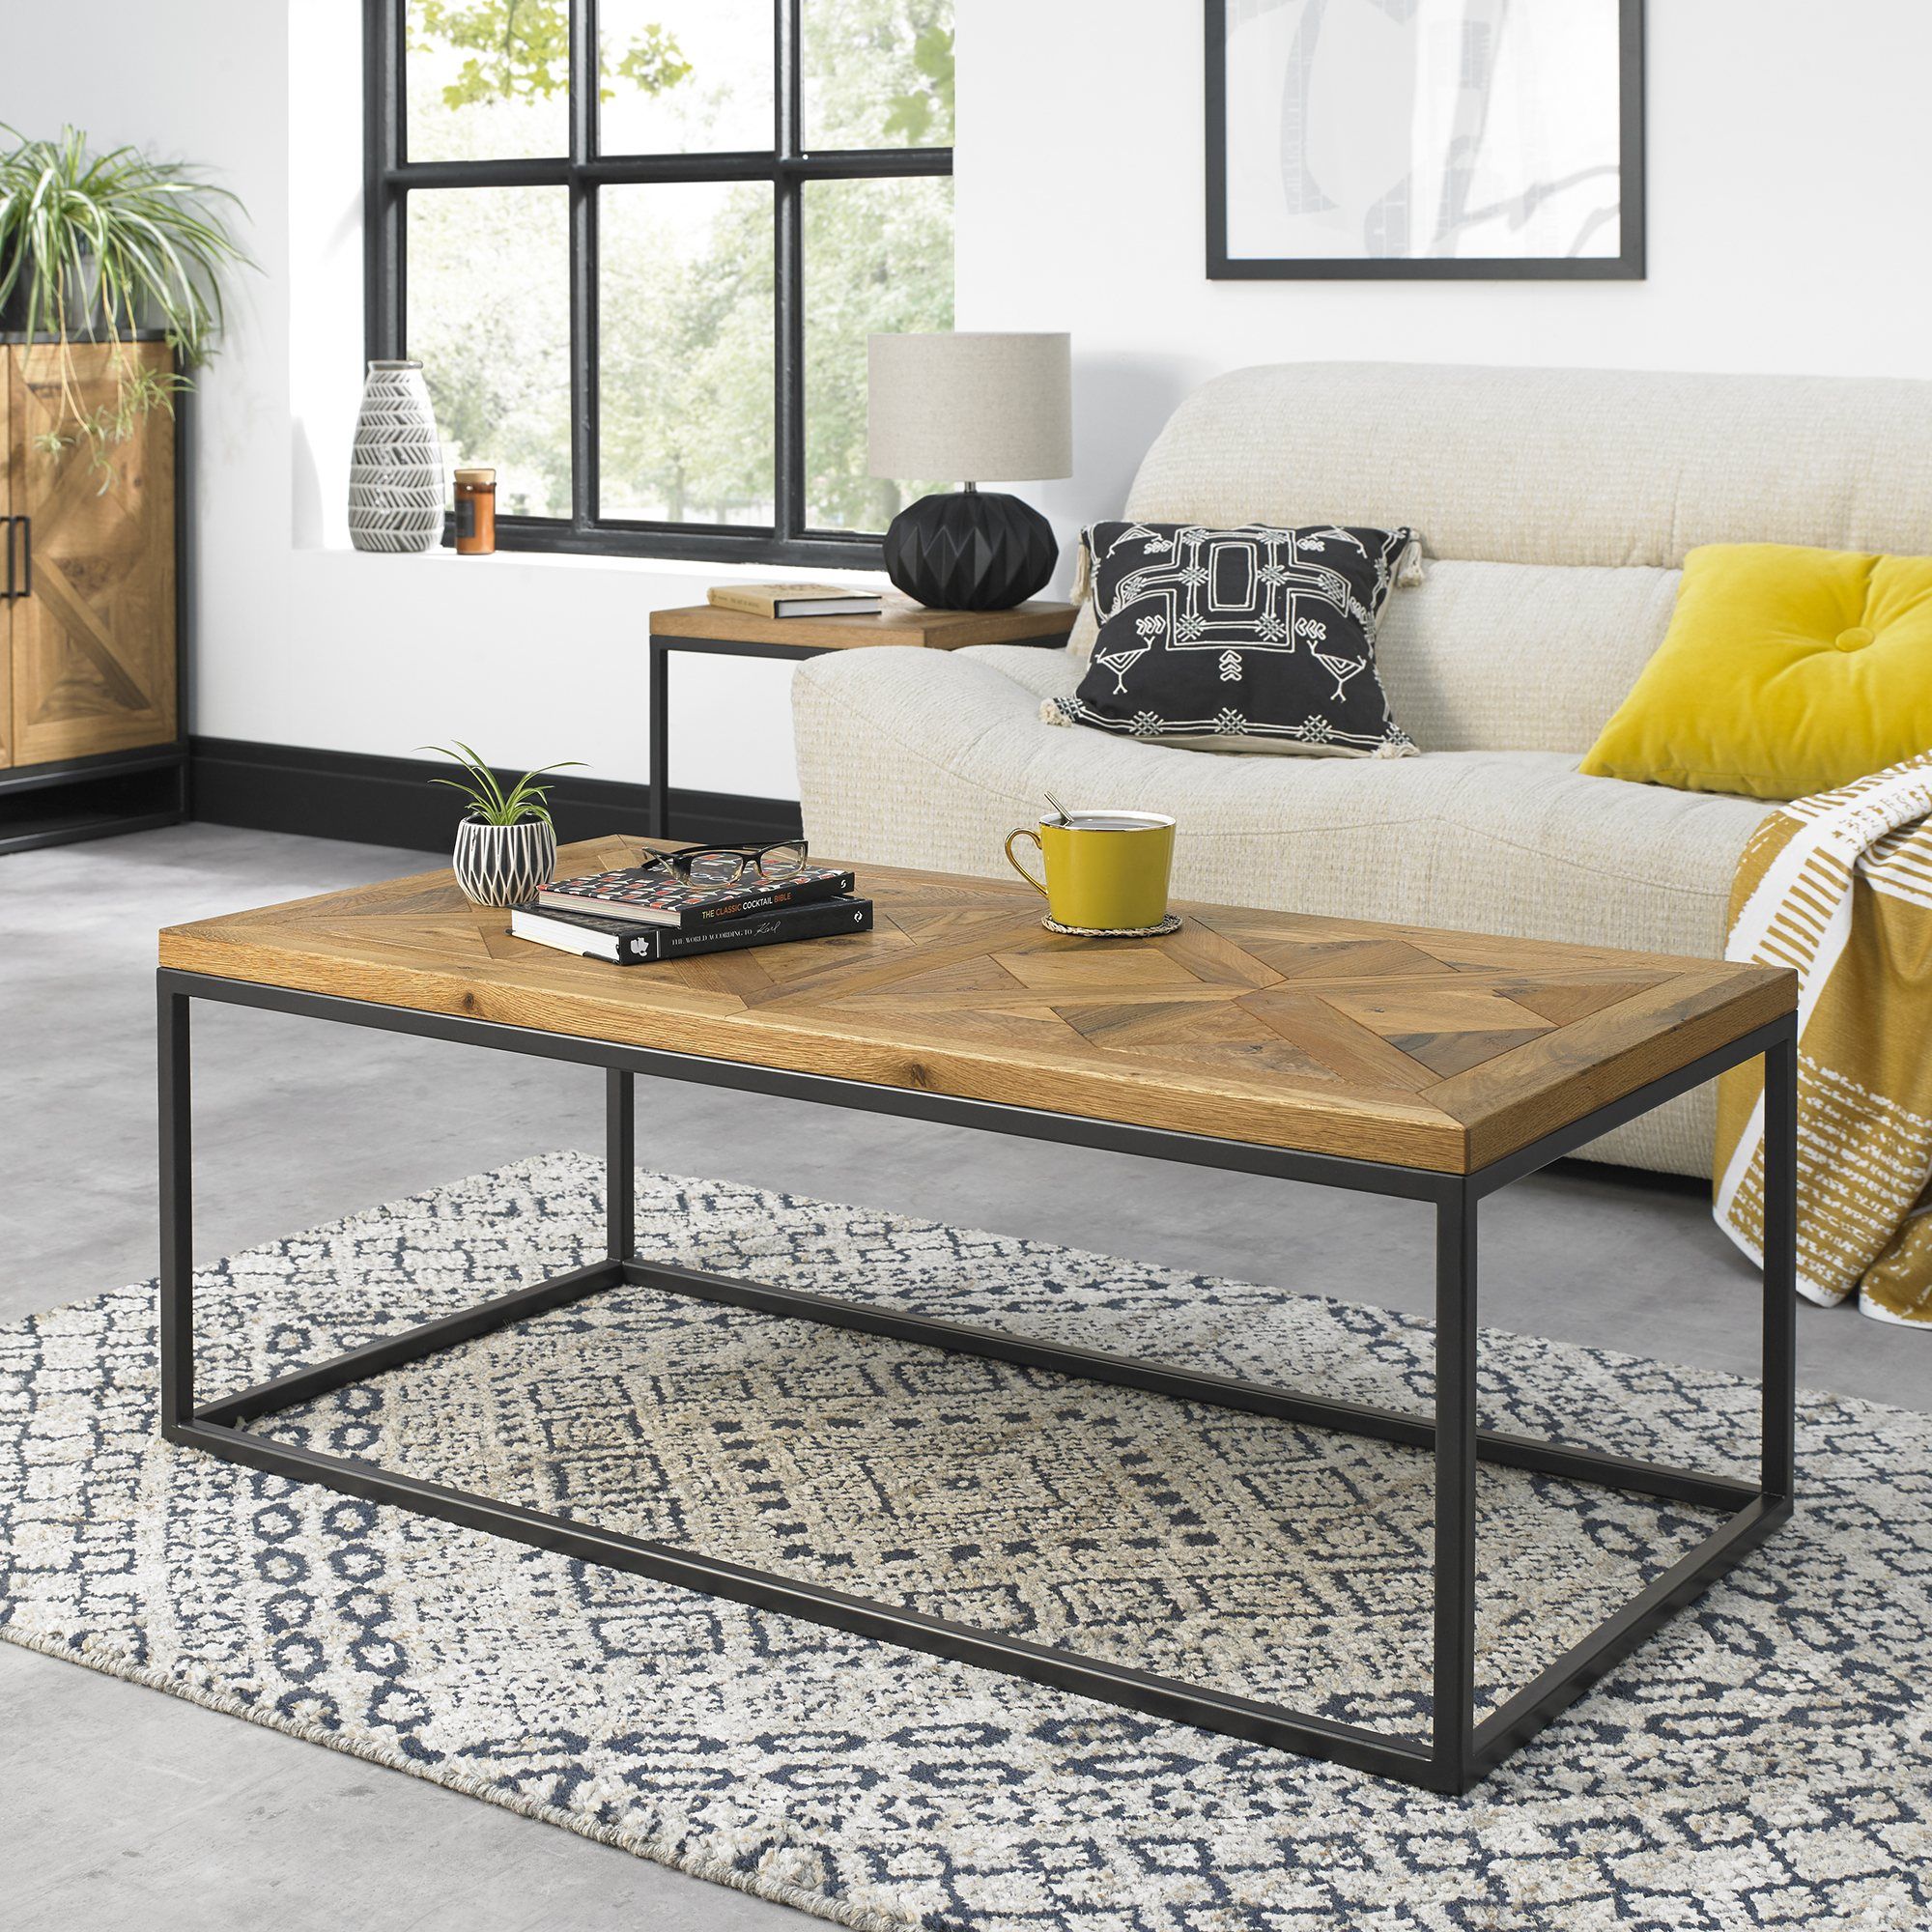 Indus Rustic Oak Coffee Table | Living Room Furniture – Bentley Designs Within Rustic Wood Coffee Tables (View 15 of 21)